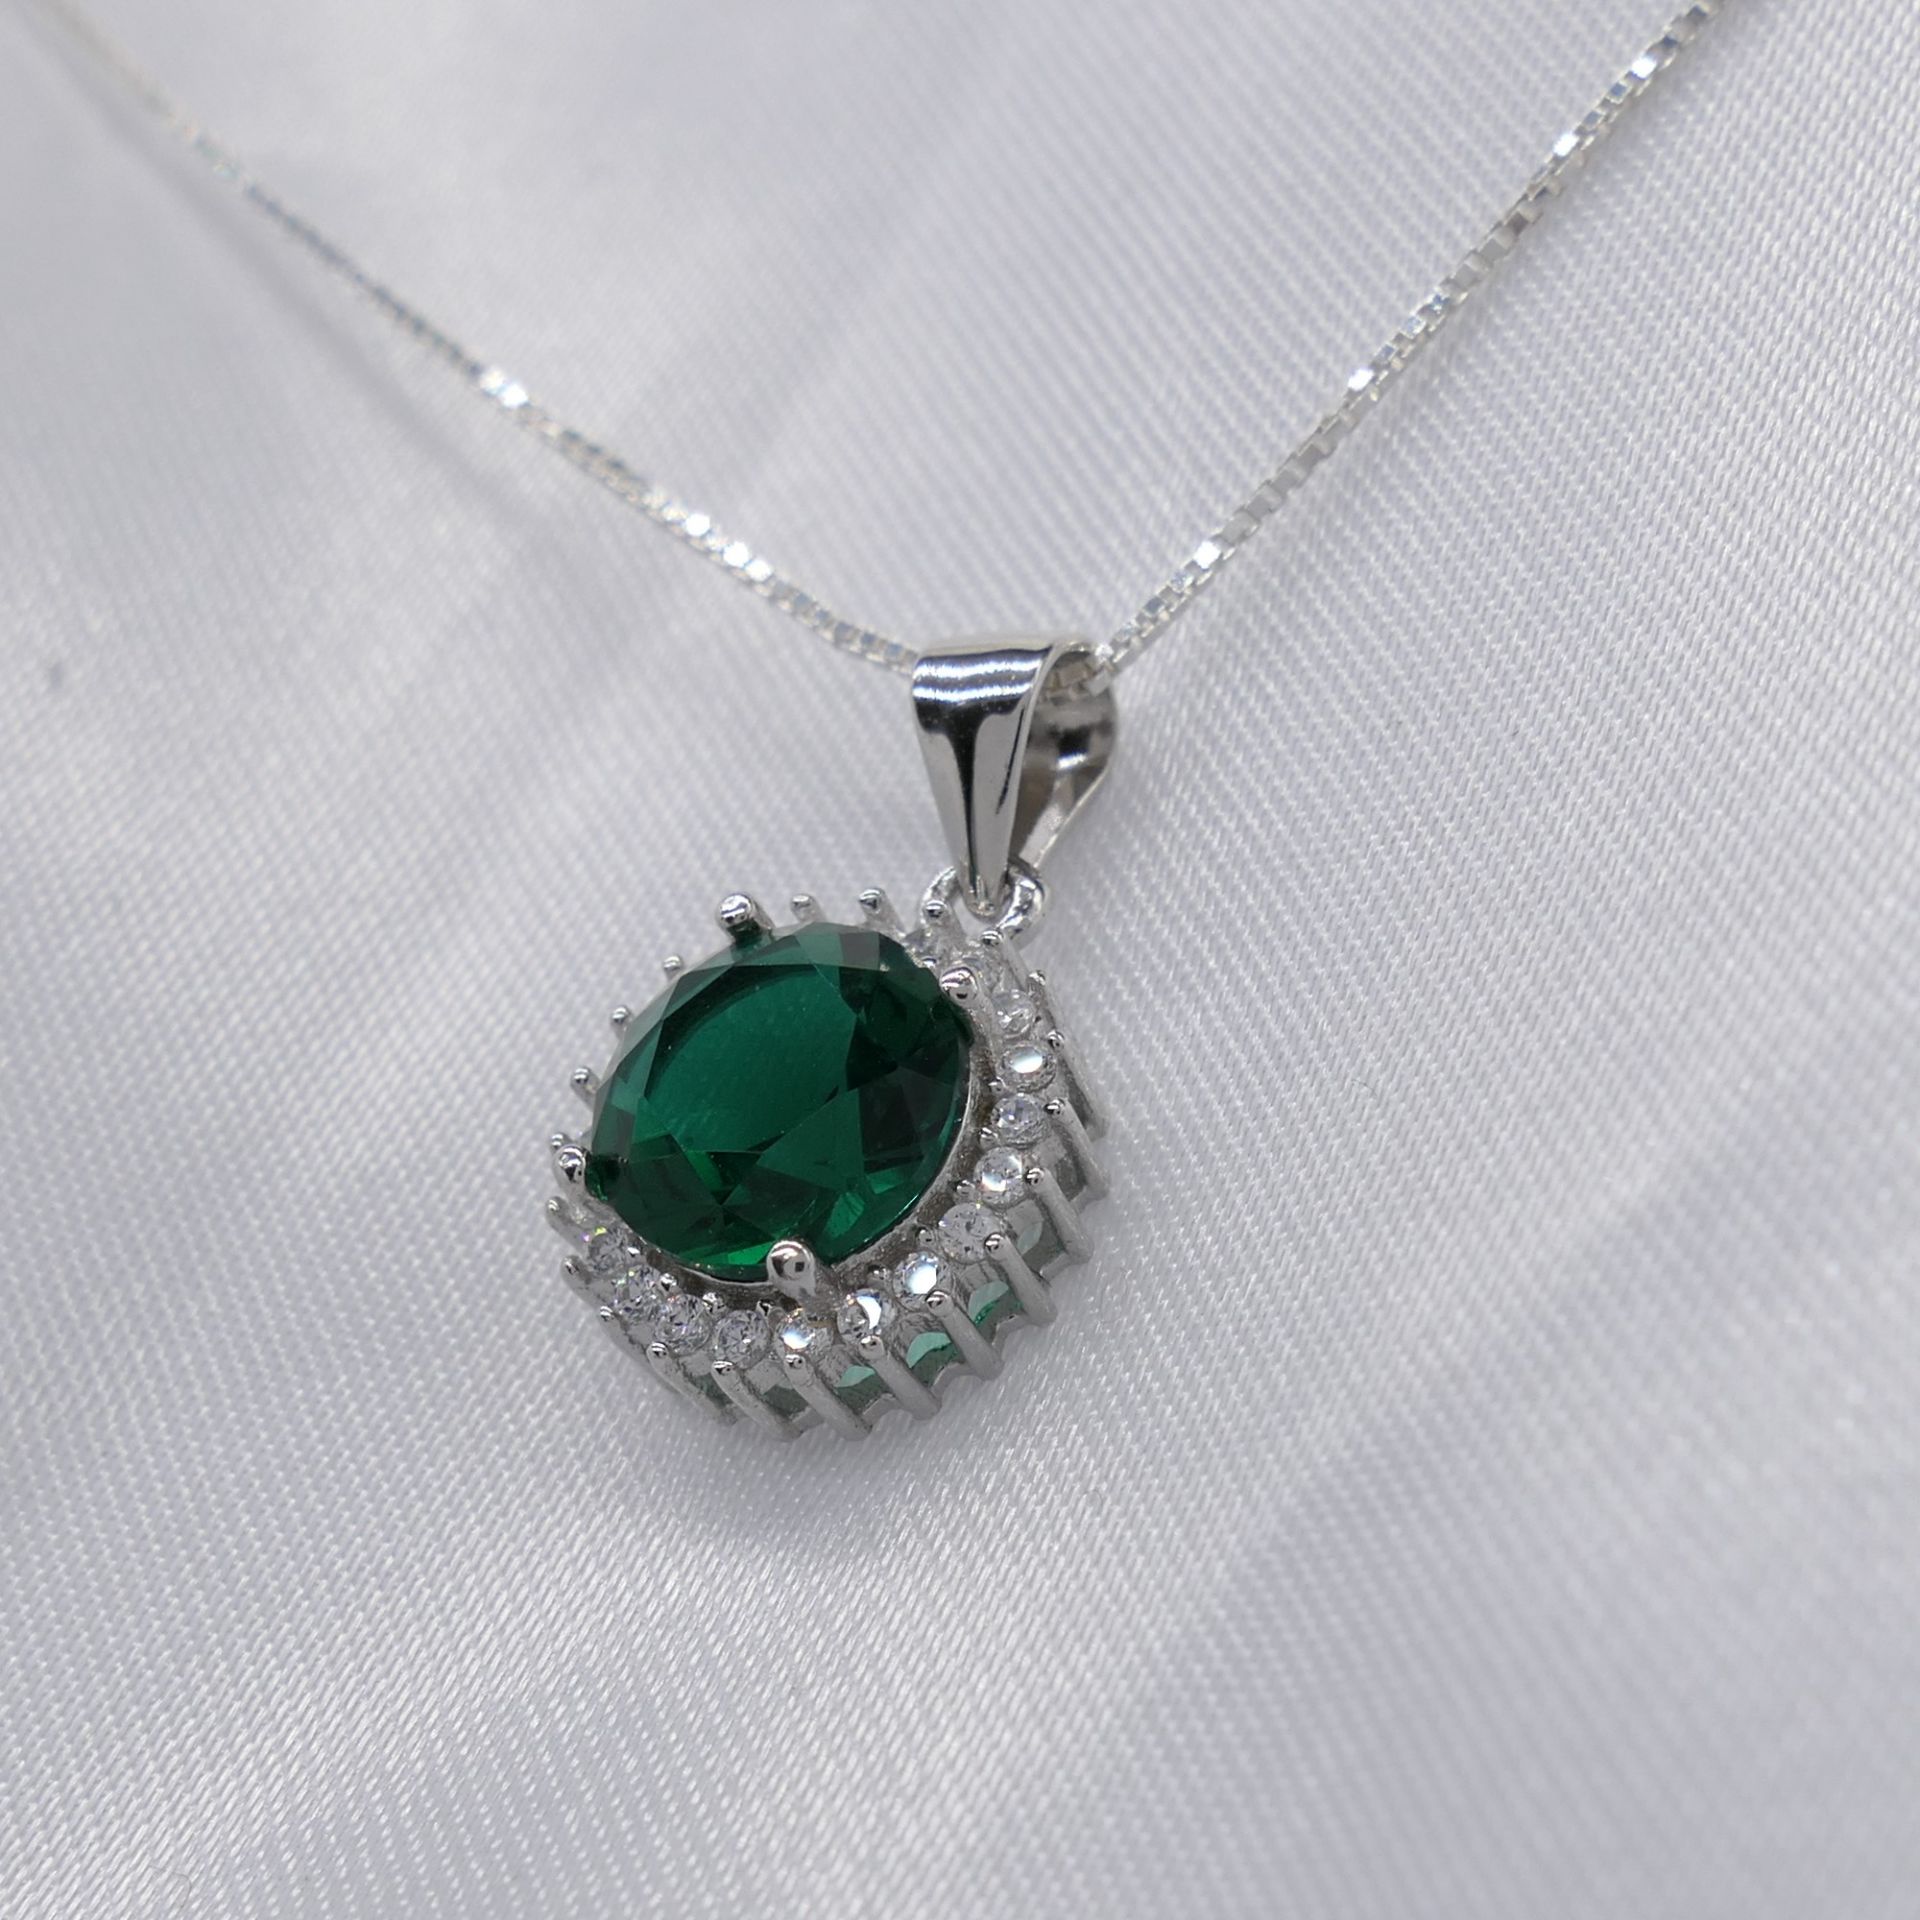 Green gem pendant and chain in sterling silver - Image 2 of 6